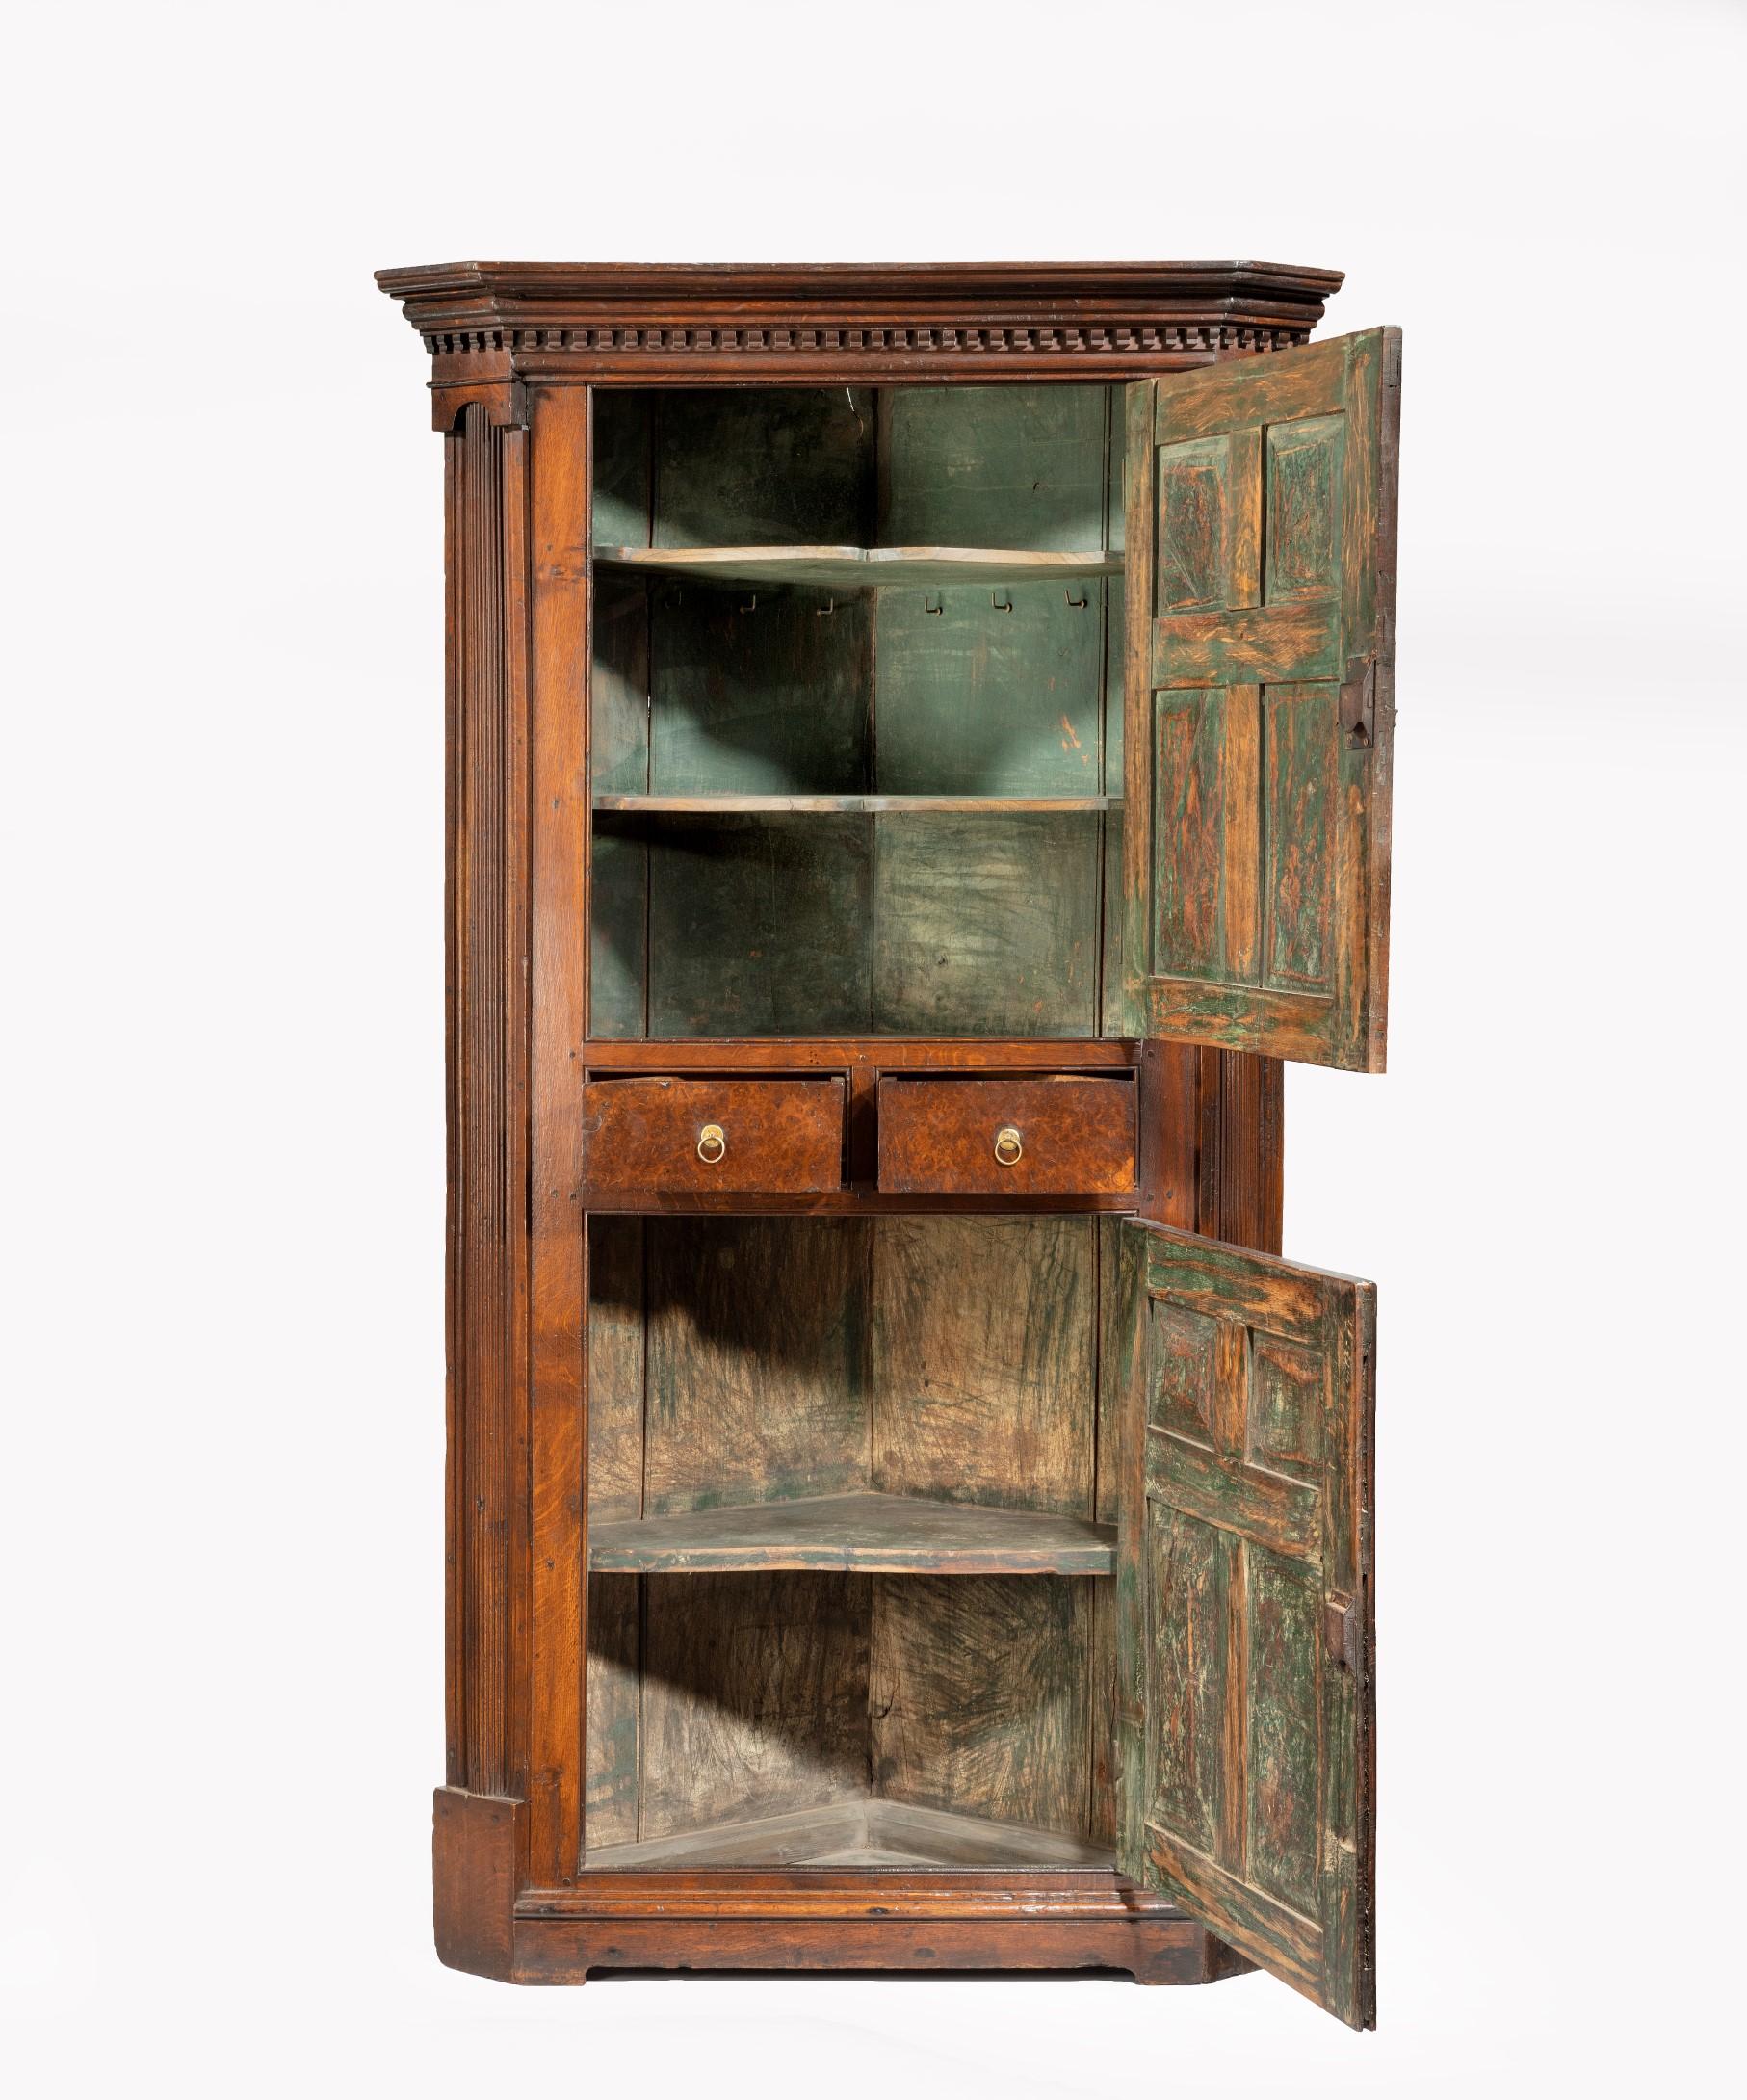 A wonderful George I oak and burr yew standing corner cupboard, the corner cupboard's dentil moulded cornice supported by a pair of fluted pilasters which flank two panelled cupboard doors, the two cupboard doors have panels of solid burr yew and